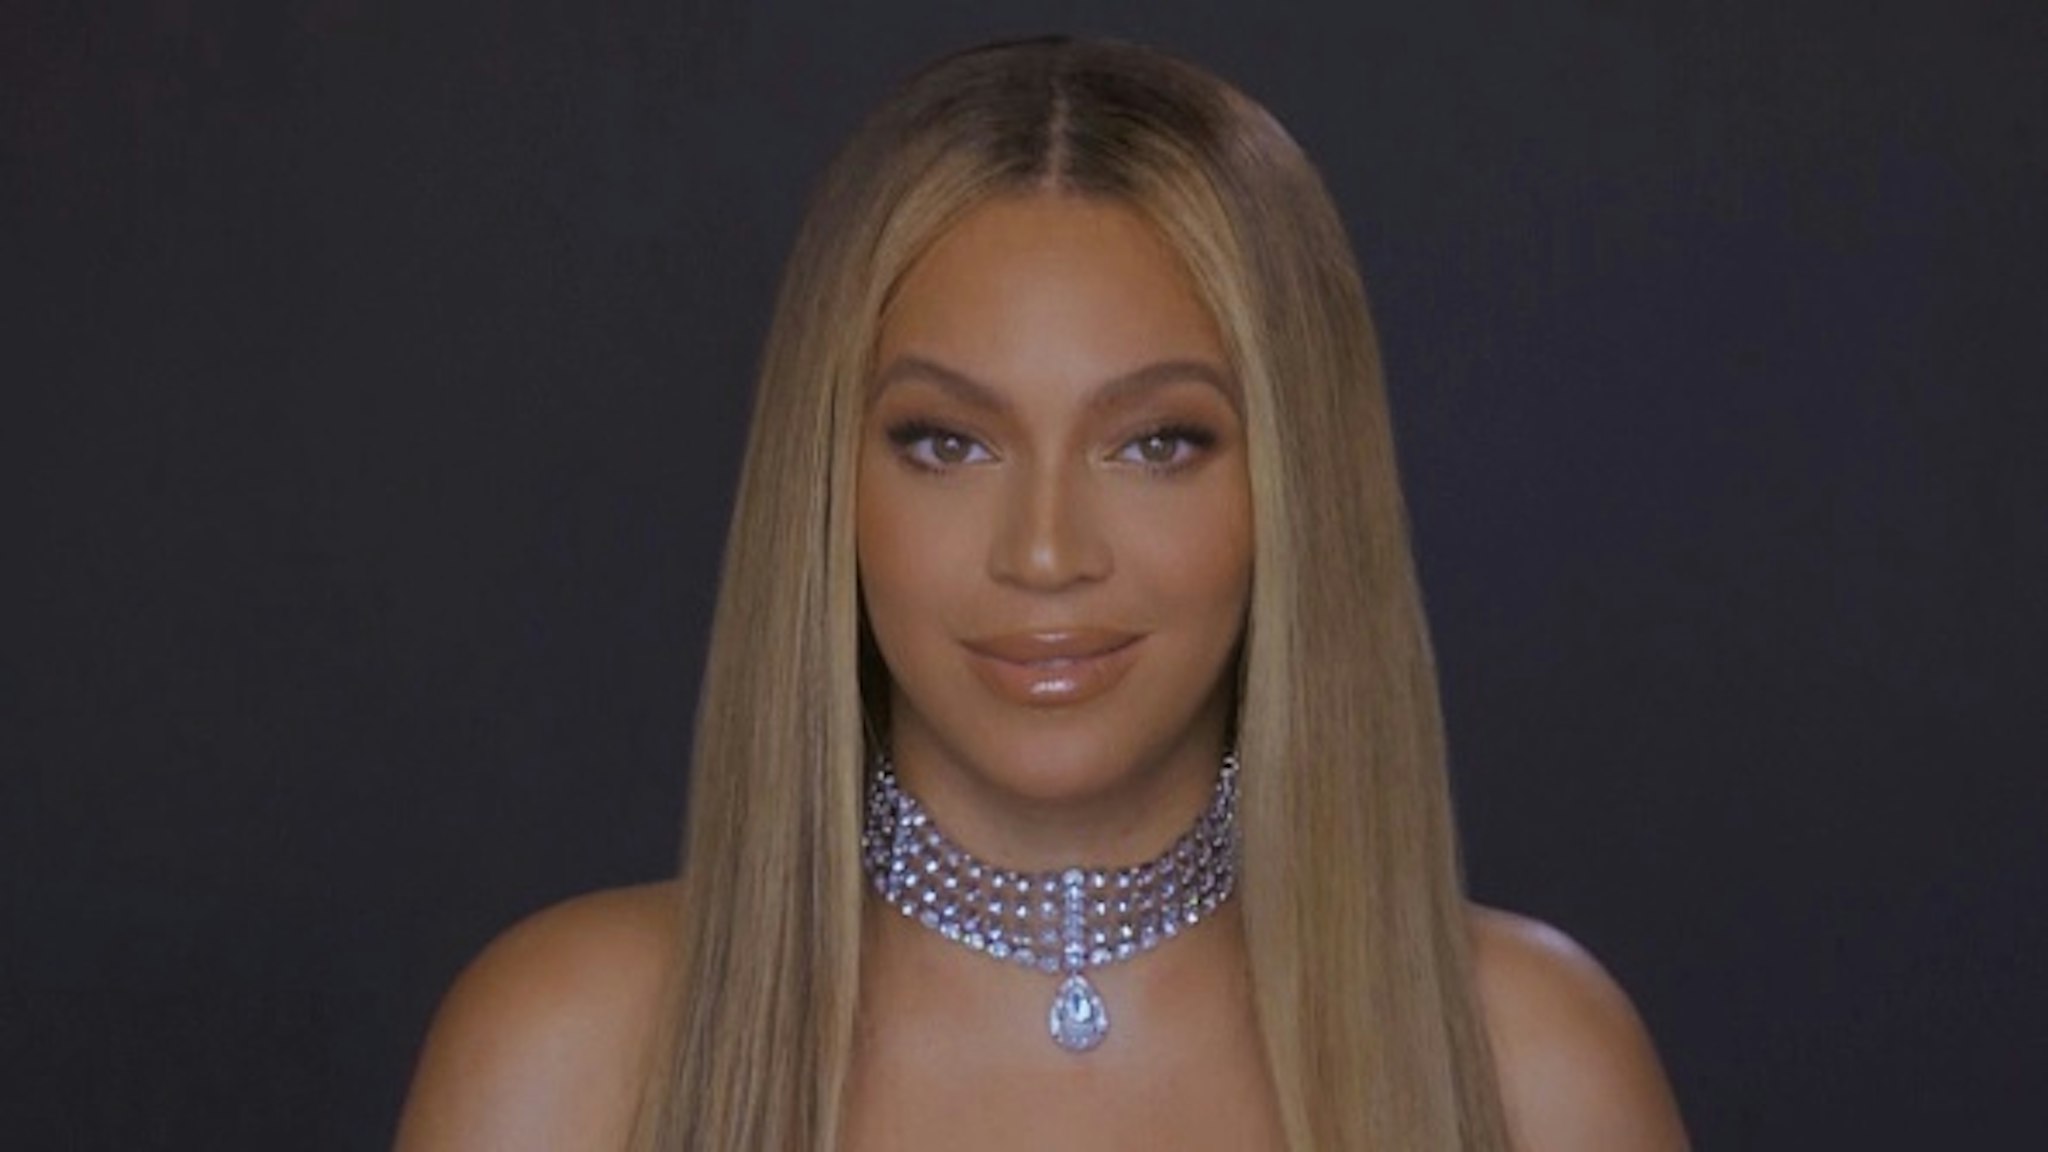 VARIOUS CITIES - JUNE 28: In this screengrab, Beyoncé is seen during the 2020 BET Awards. The 20th annual BET Awards, which aired June 28, 2020, was held virtually due to restrictions to slow the spread of COVID-19.